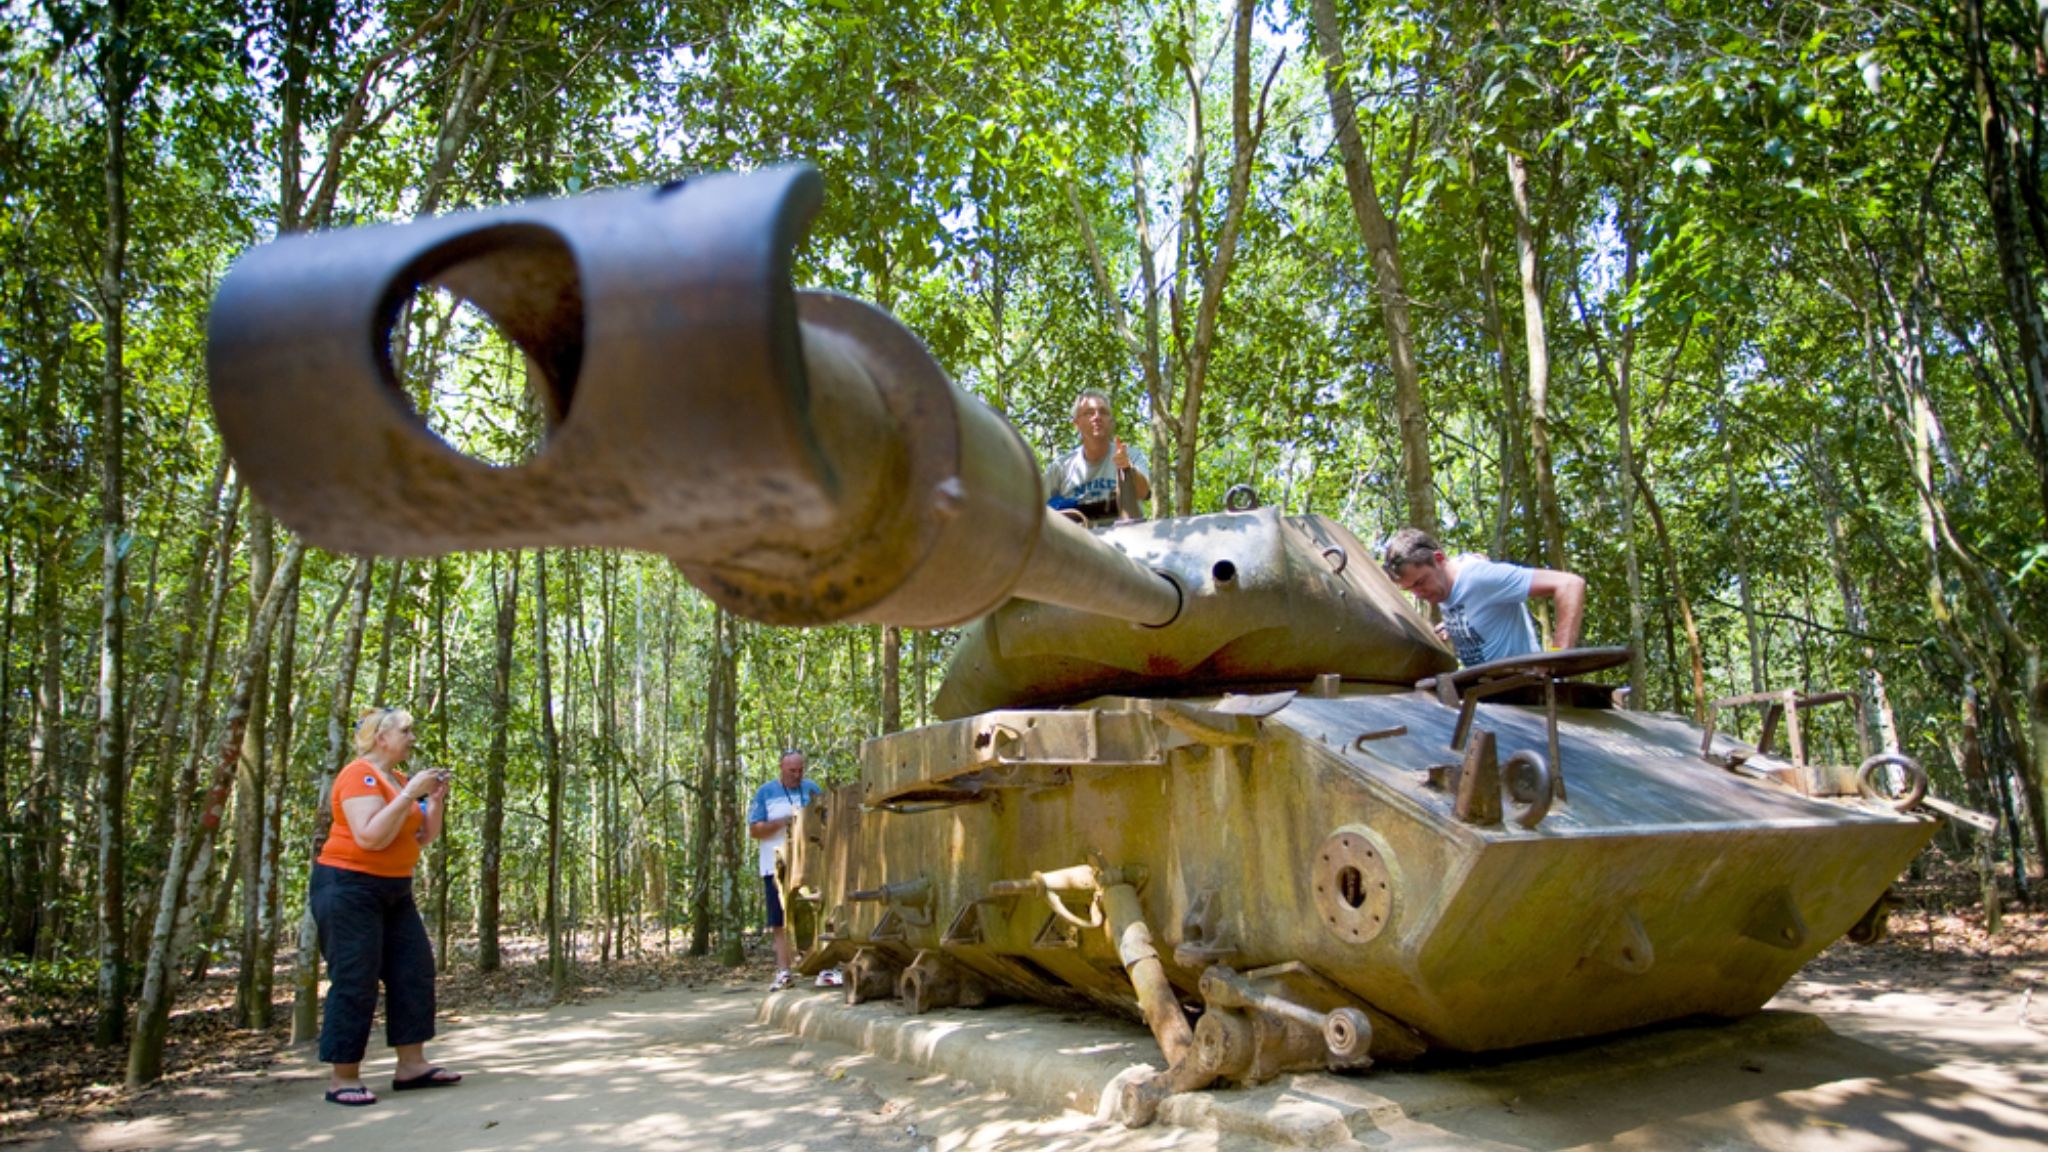 Day 9 Cu Chi Tunnels Where You Will Learn About Vietnam's History